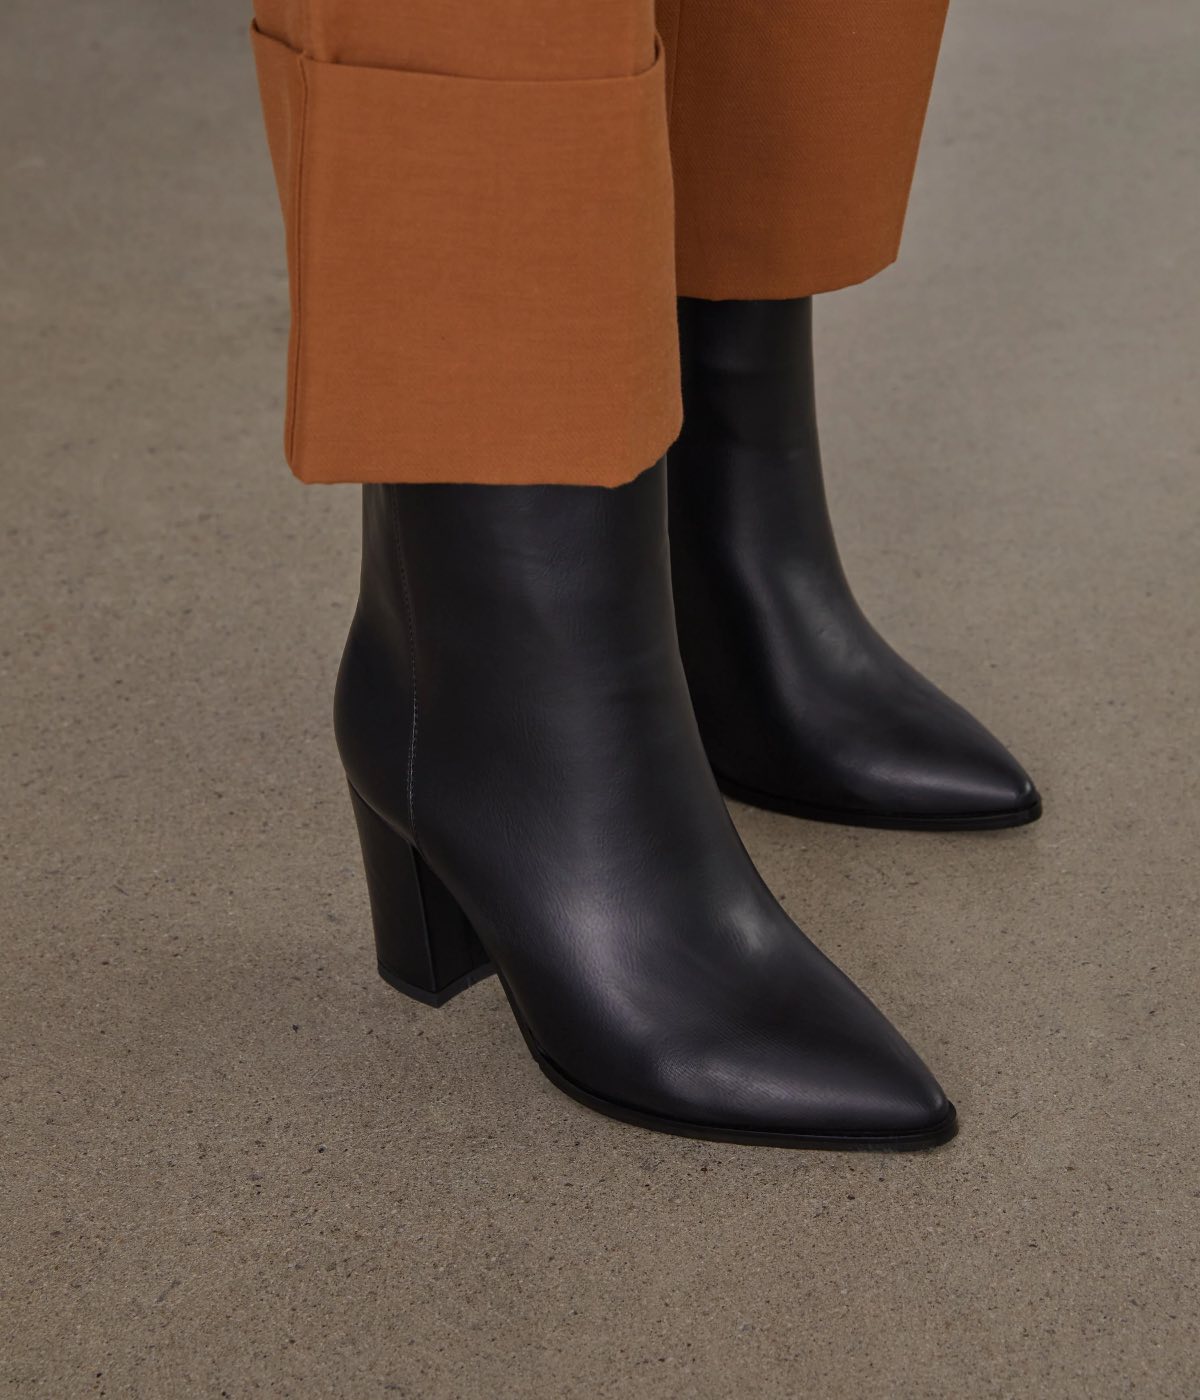 Pointy back elegant vegan leather boots from Matt and Nat, modeled with orange trouser pants. 